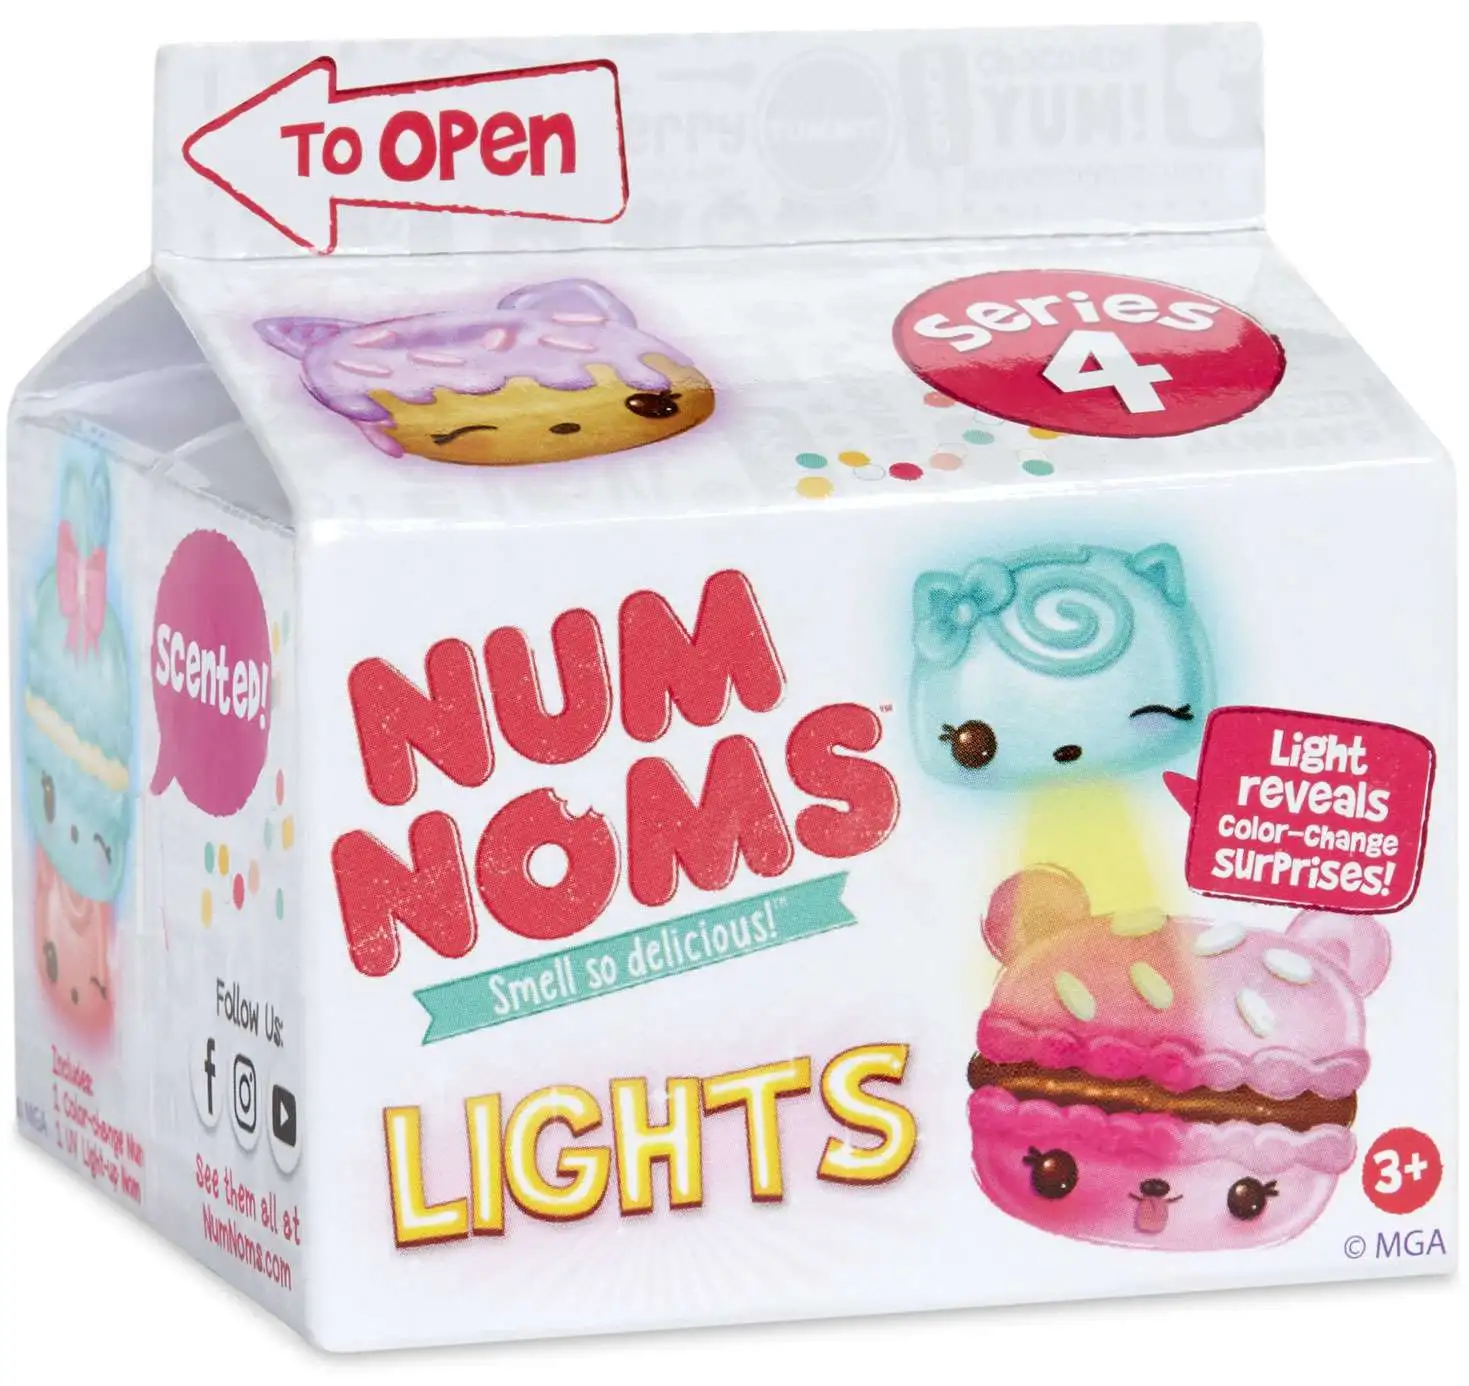 Num Noms Series 4.2 Review And Giveaway - Sticky Mud & Belly Laughs